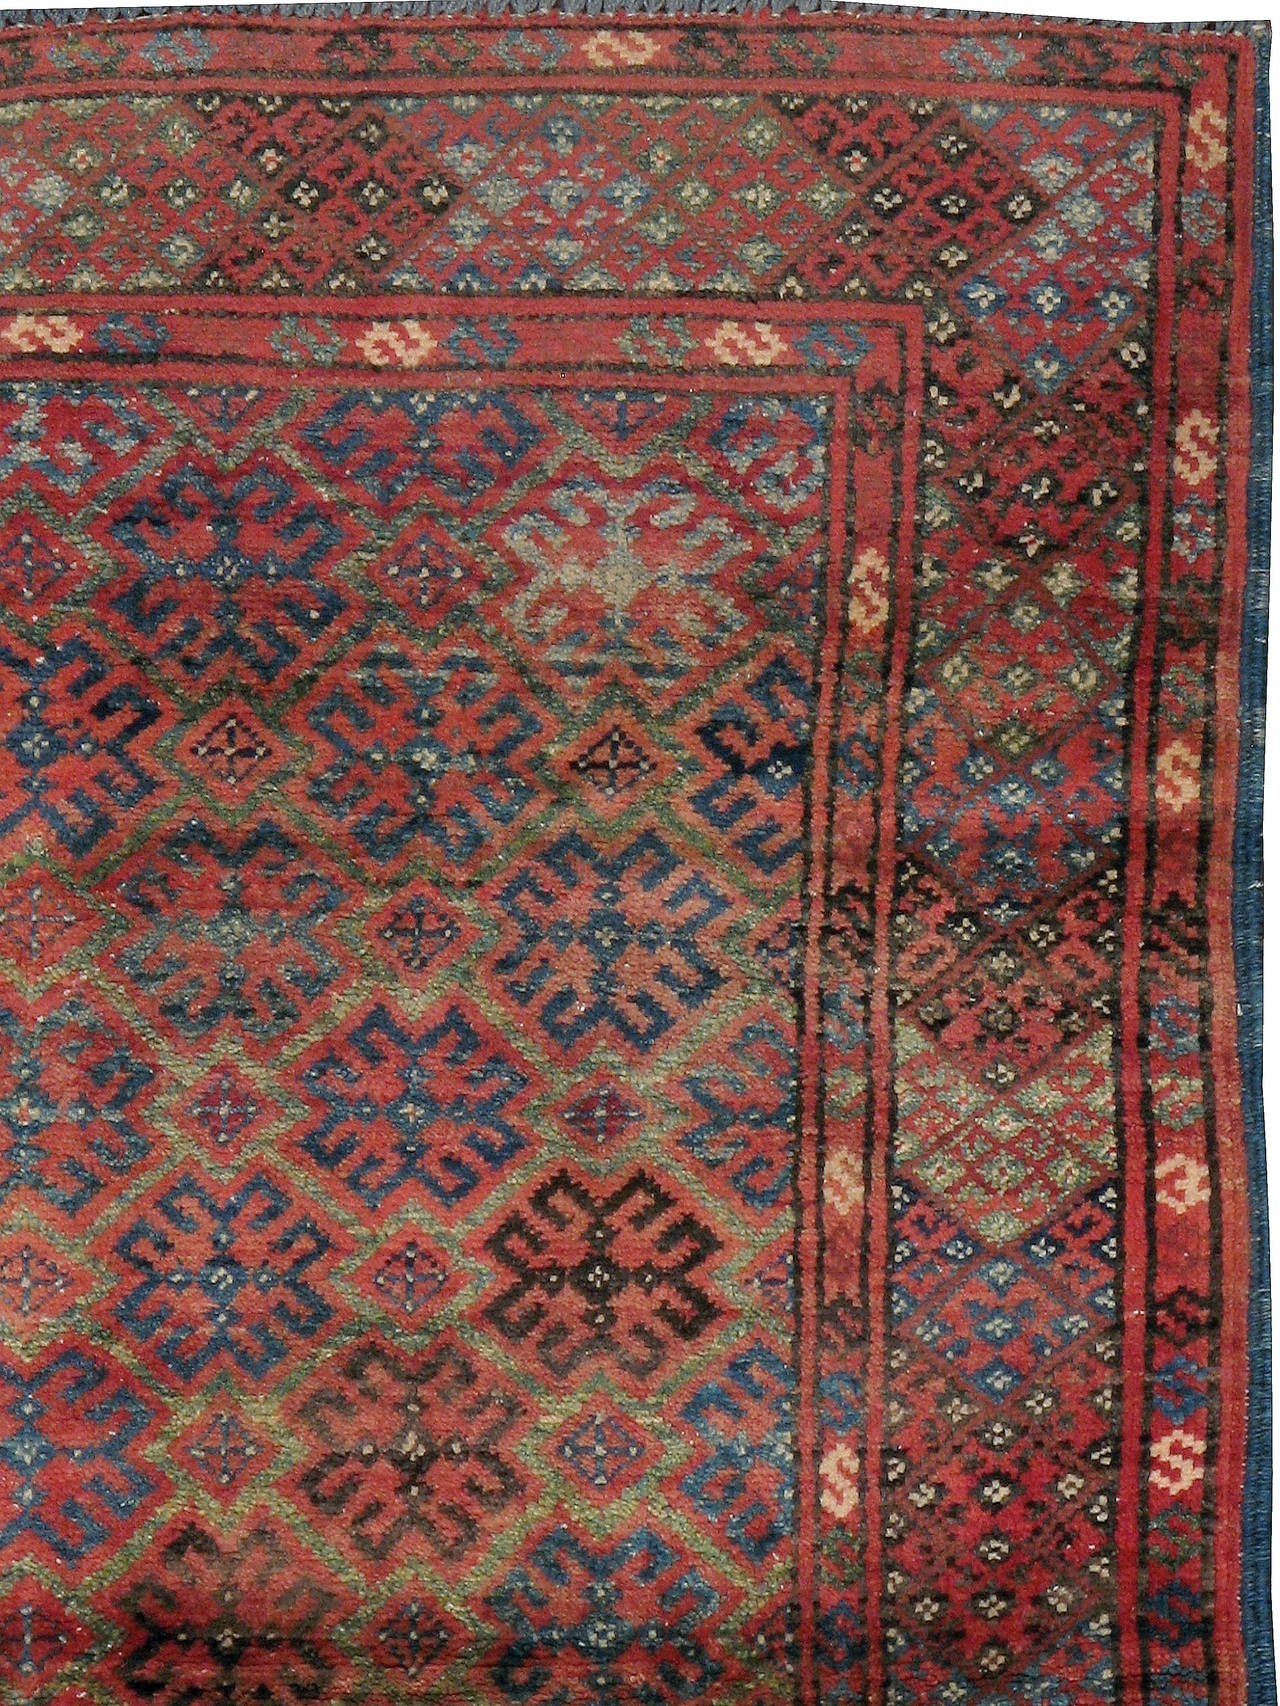 A vintage Afghan Baluch carpet from the second quarter of the 20th century.